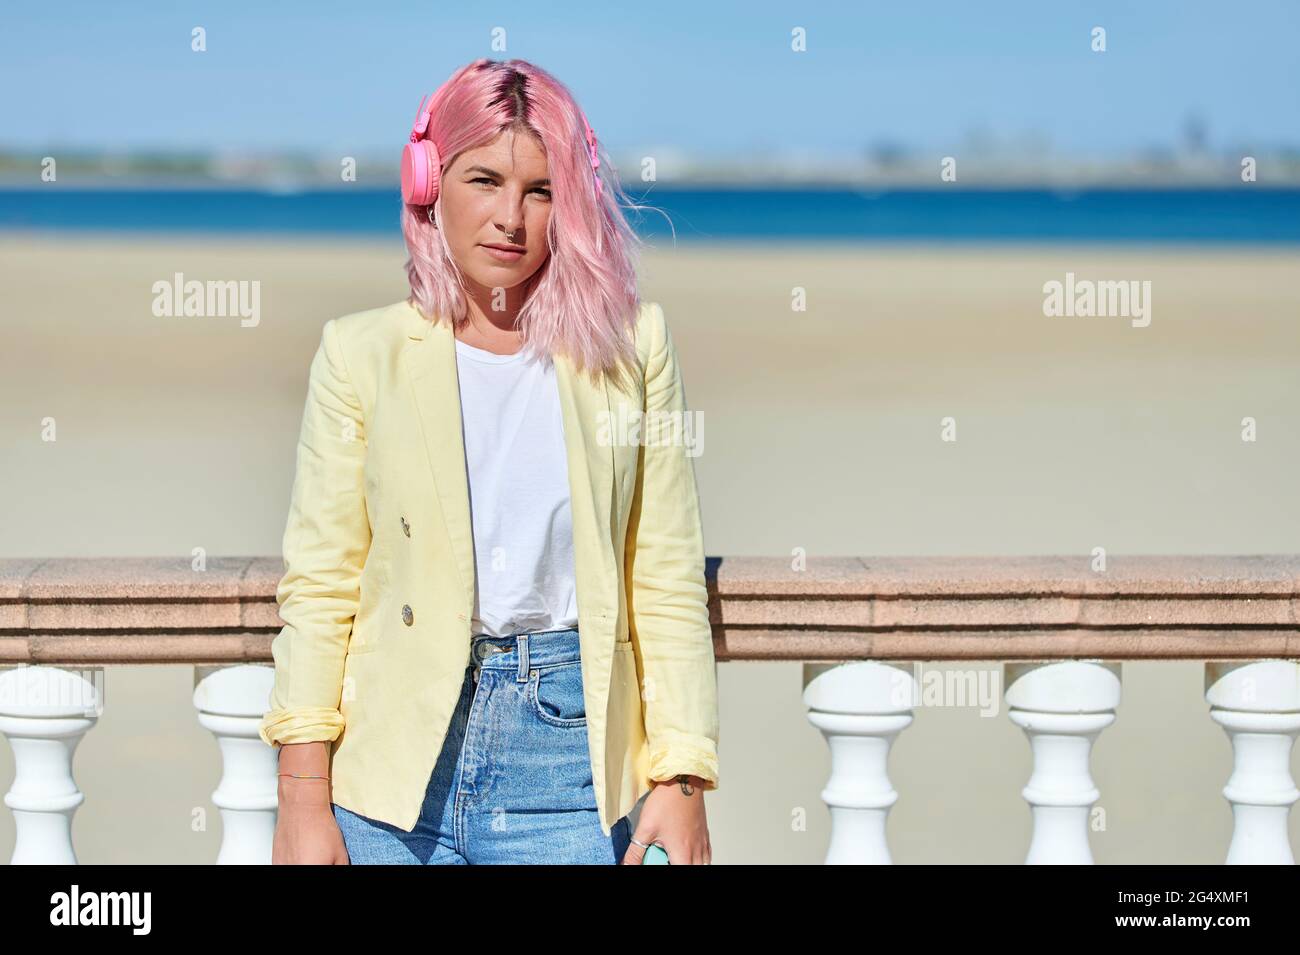 Young woman with pink hair leaning on railing at beach Stock Photo